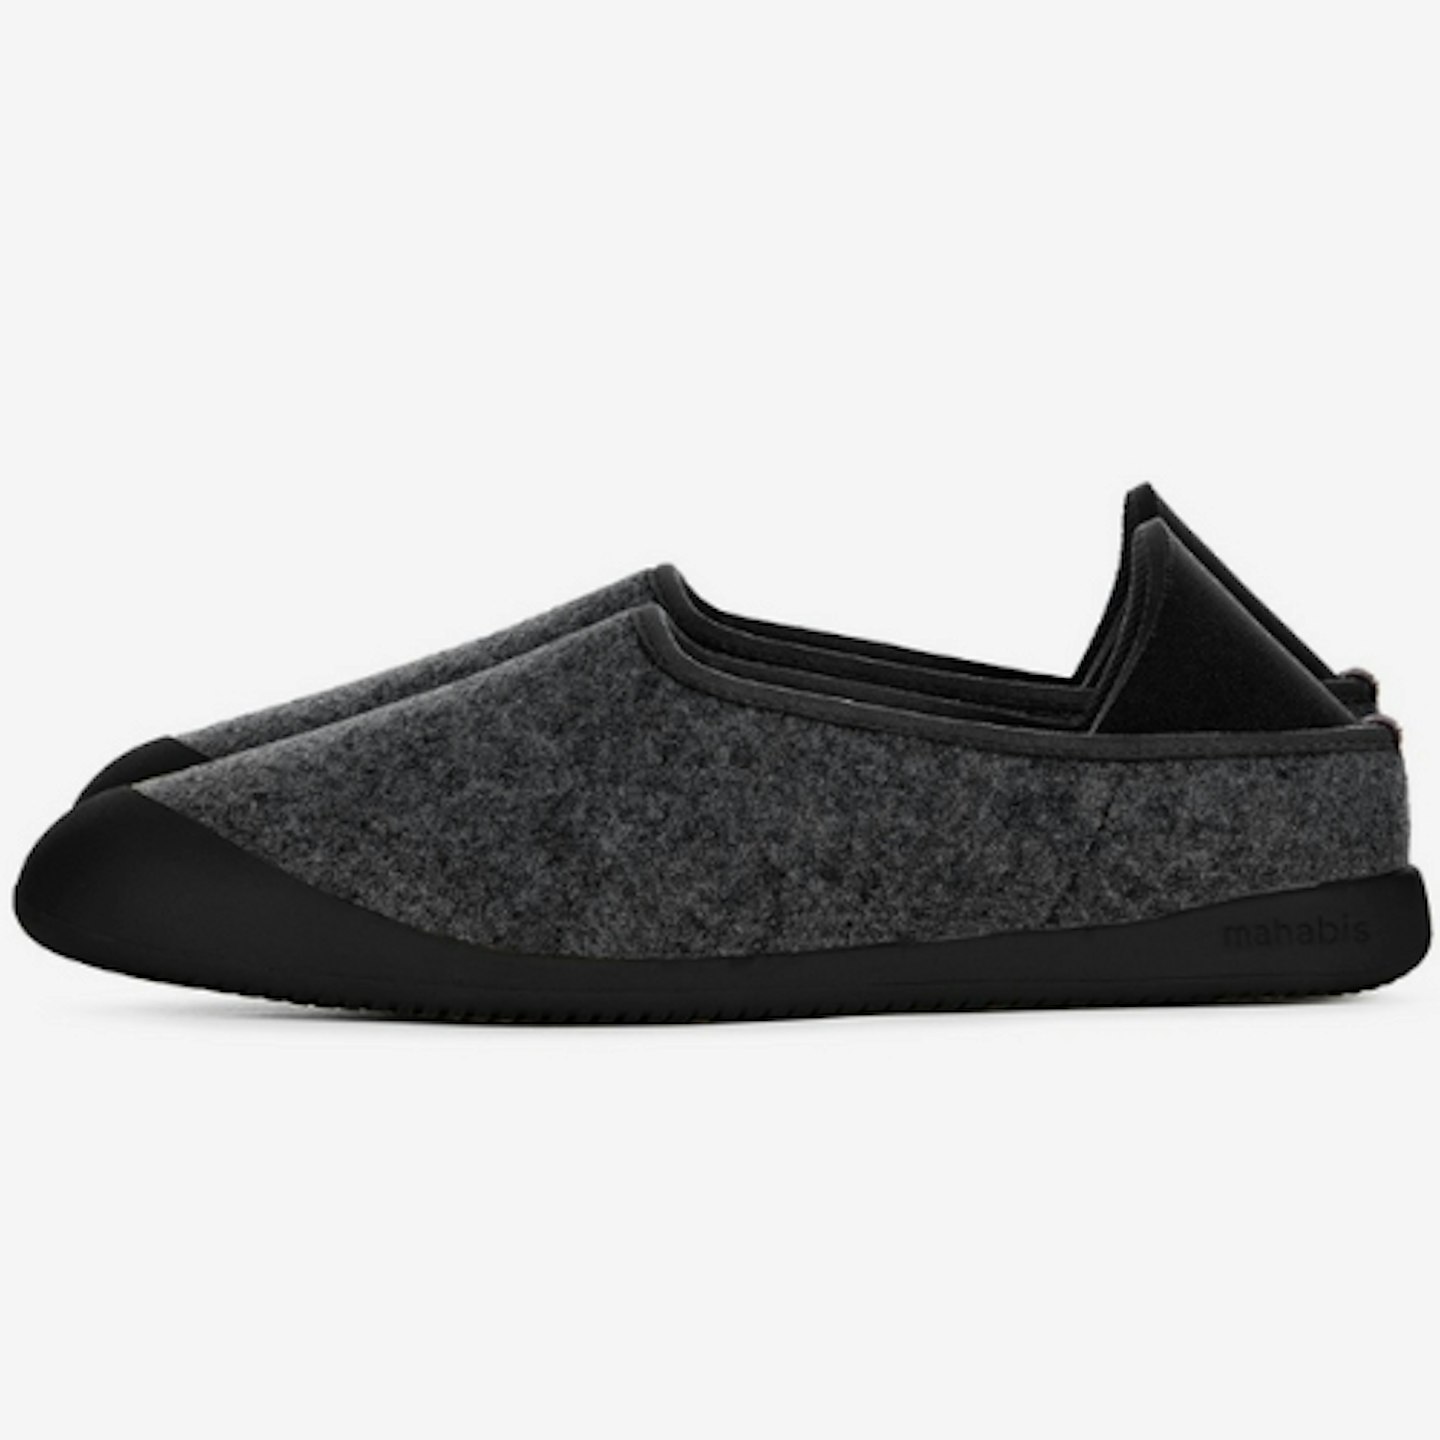 Mahabis Curve Slippers